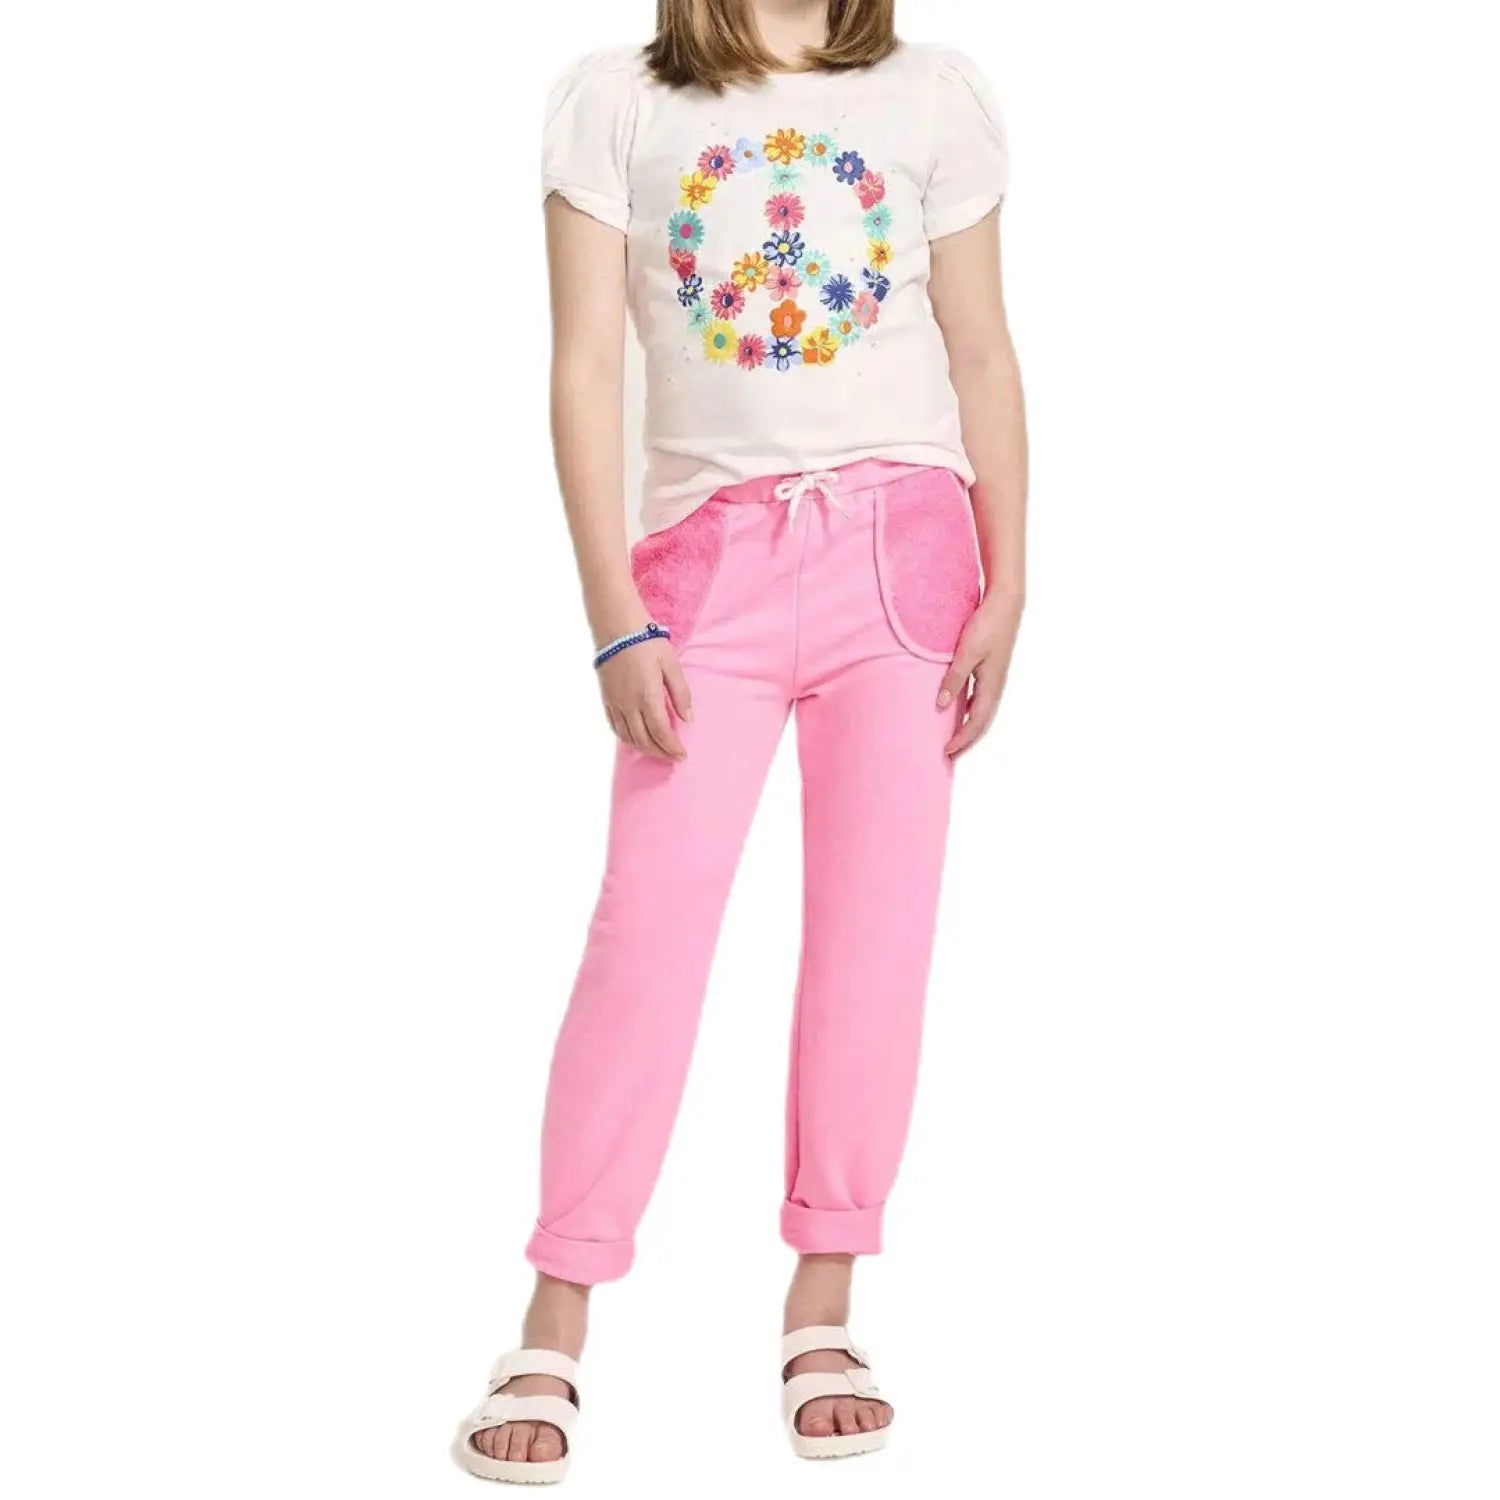 Hatley Girl's Pink Neon Track Pants. Front view shown on model.